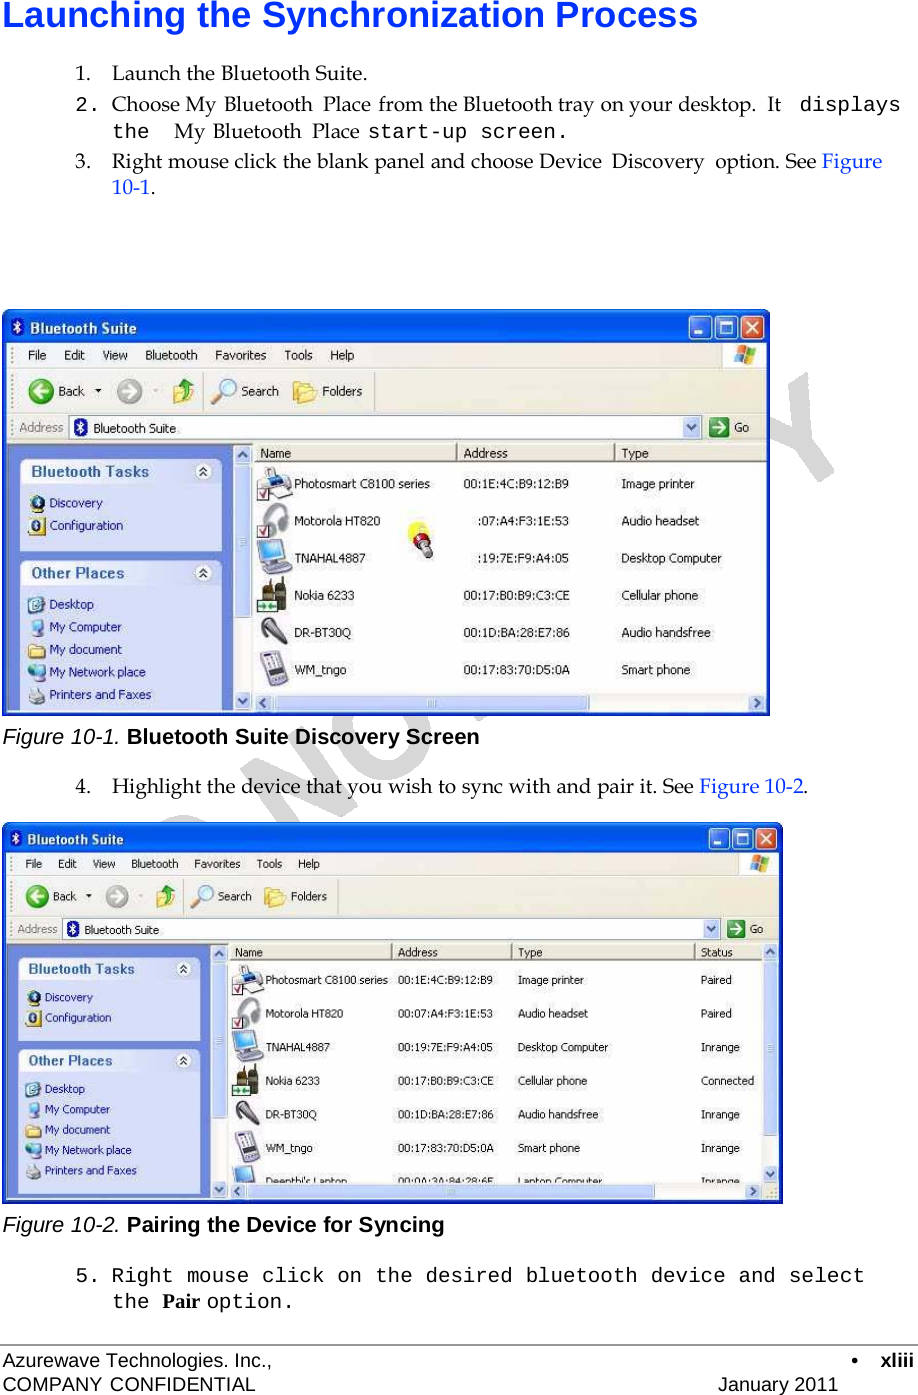   Launching the Synchronization Process  1.    Launch the Bluetooth Suite. 2. Choose My Bluetooth  Place from the Bluetooth tray on your desktop.  It   displays the  My Bluetooth  Place start-up screen. 3.    Right mouse click the blank panel and choose Device  Discovery  option. See Figure 10-1.                          Figure 10-1. Bluetooth Suite Discovery Screen  4.    Highlight the device that you wish to sync with and pair it. See Figure 10-2.                     Figure 10-2. Pairing the Device for Syncing  5. Right mouse click on the desired bluetooth device and select the Pair option.  Azurewave Technologies. Inc.,  •  xliii COMPANY CONFIDENTIAL   January 2011 